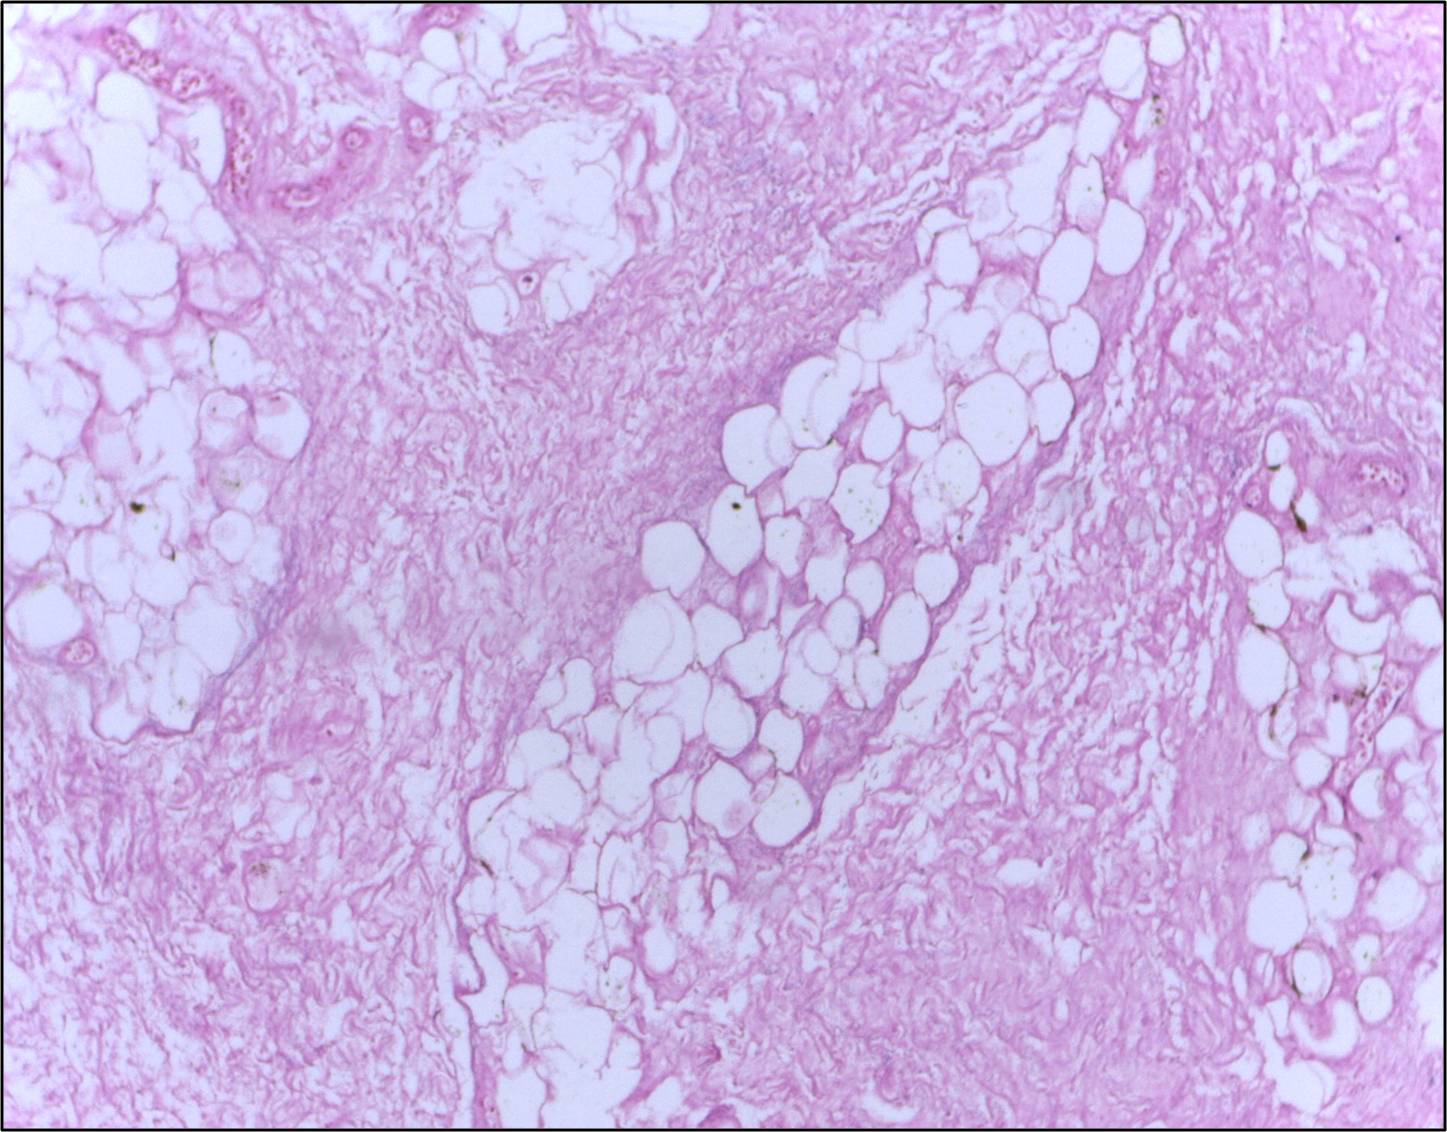 Fat Necrosis of Breast Tissue SimpleMed